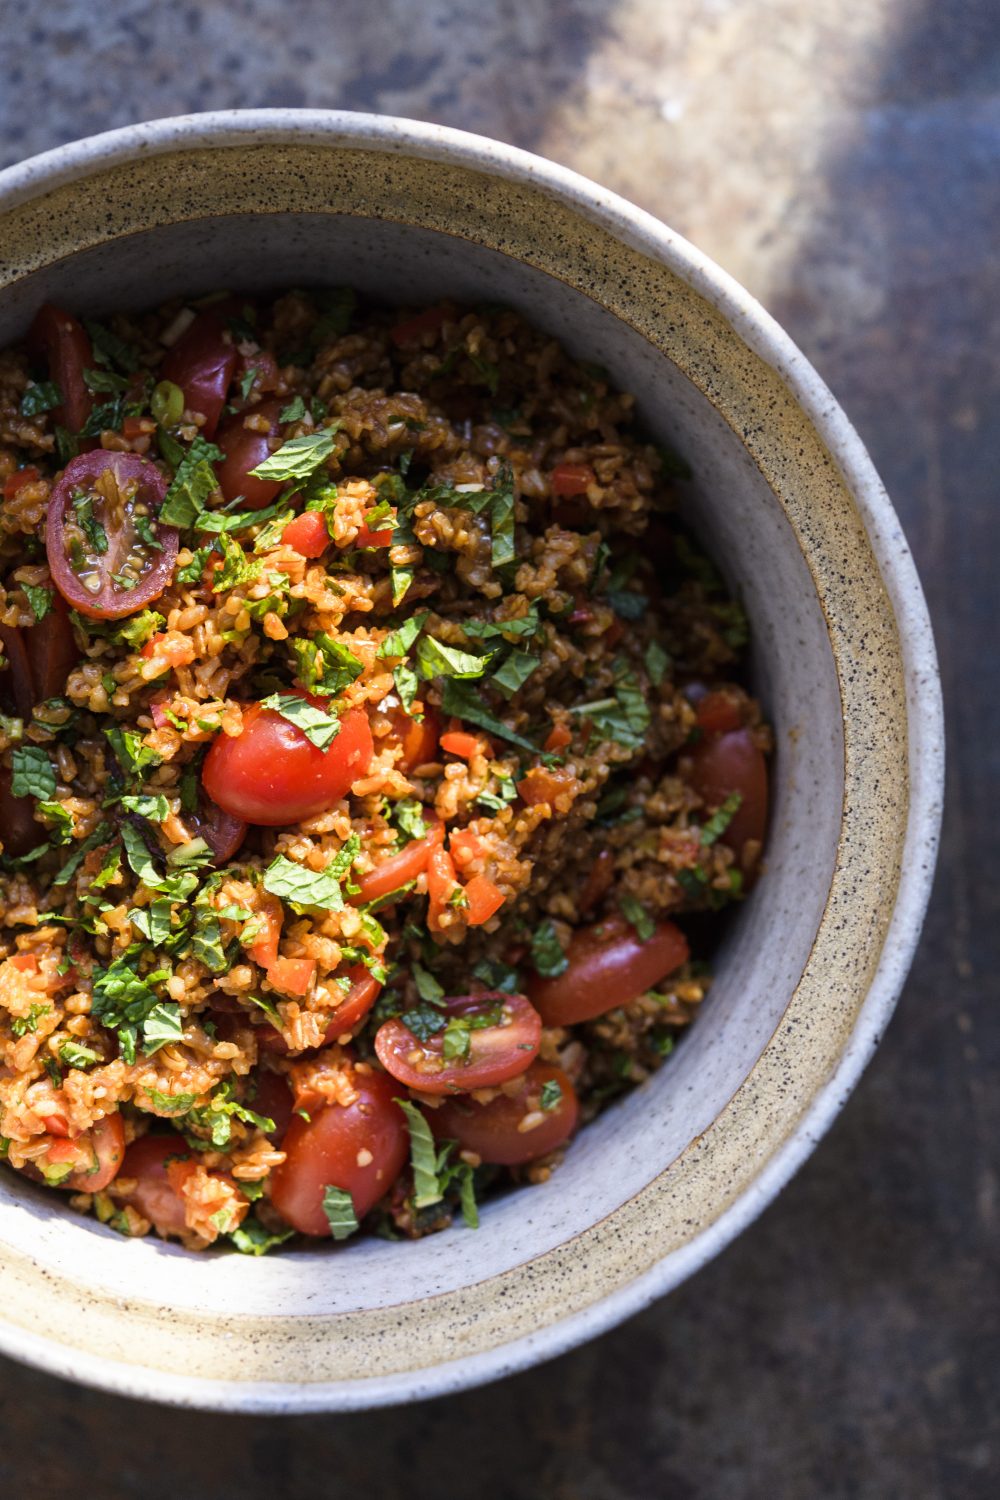 Bulgur-Tomato Pilaf with Herbs and Pomegranate Molasses (Eetch)